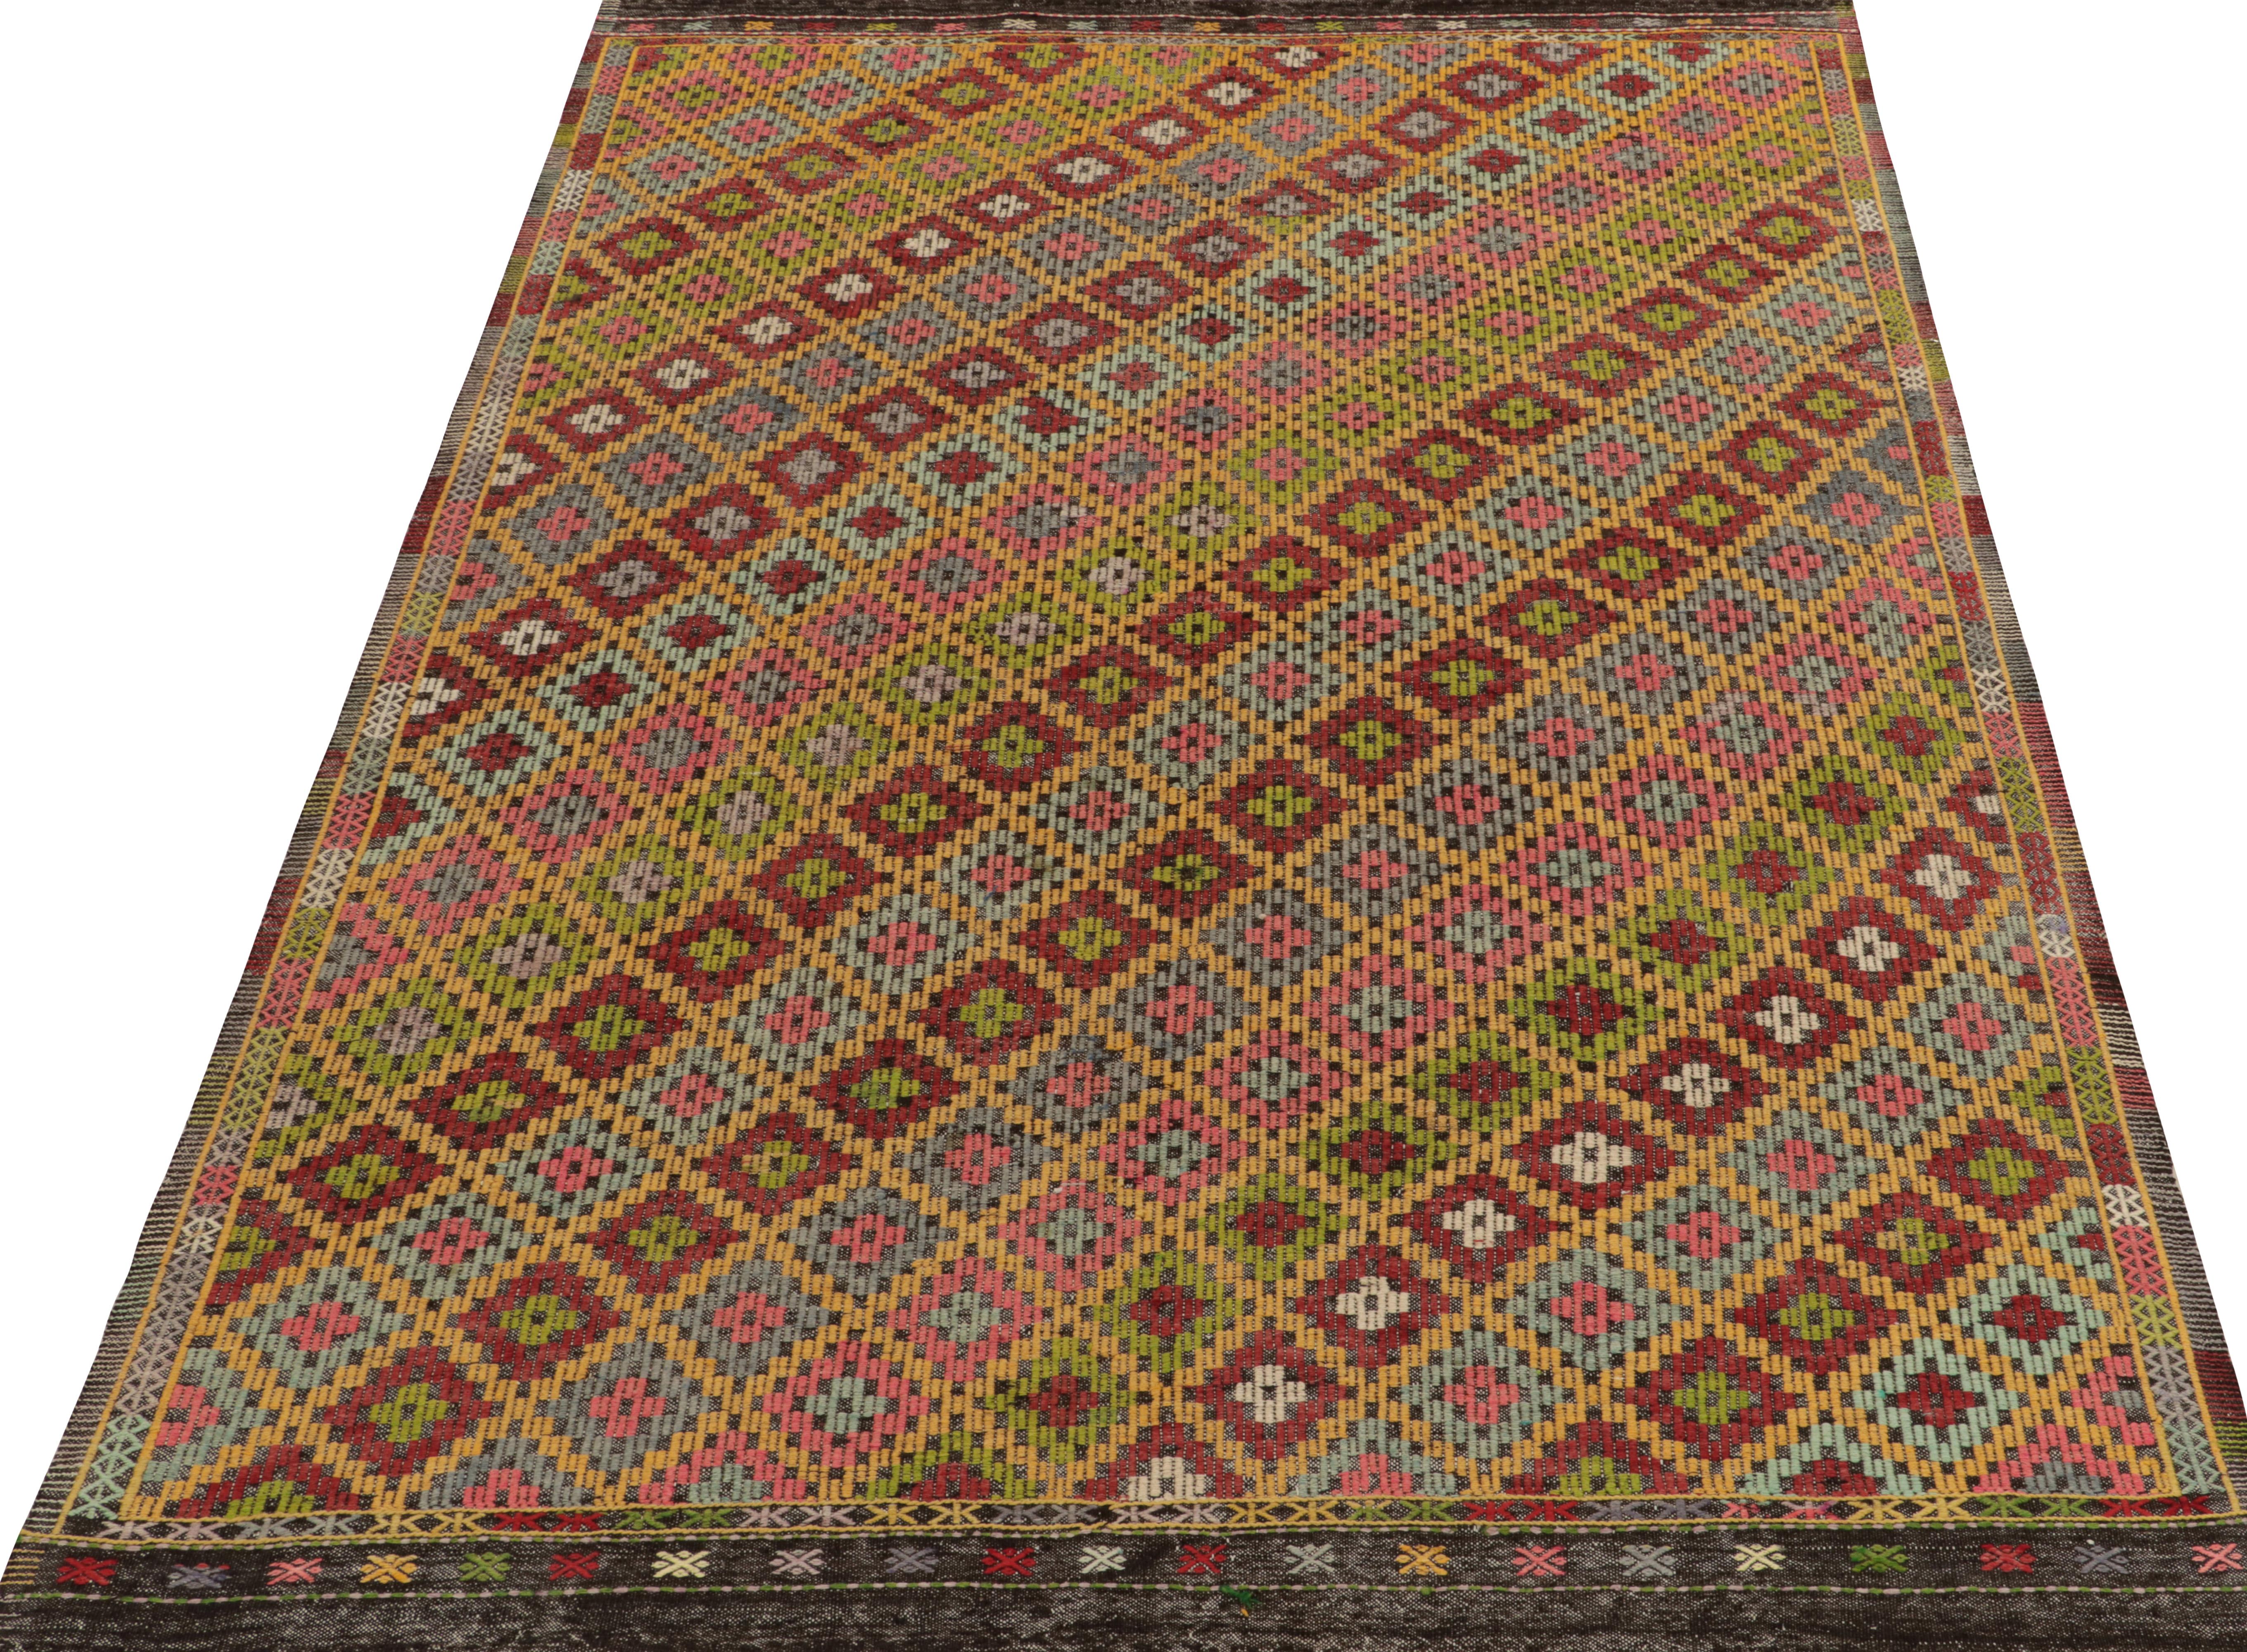 Remarking the celebrated Kurdish style, this 7 x 10 Cecim kilim rug of Anatolian sensibility is a prestigious addition to our collection. This vintage mid-century flatweave from Turkey features an embroidered lattice pattern manifesting as a rare